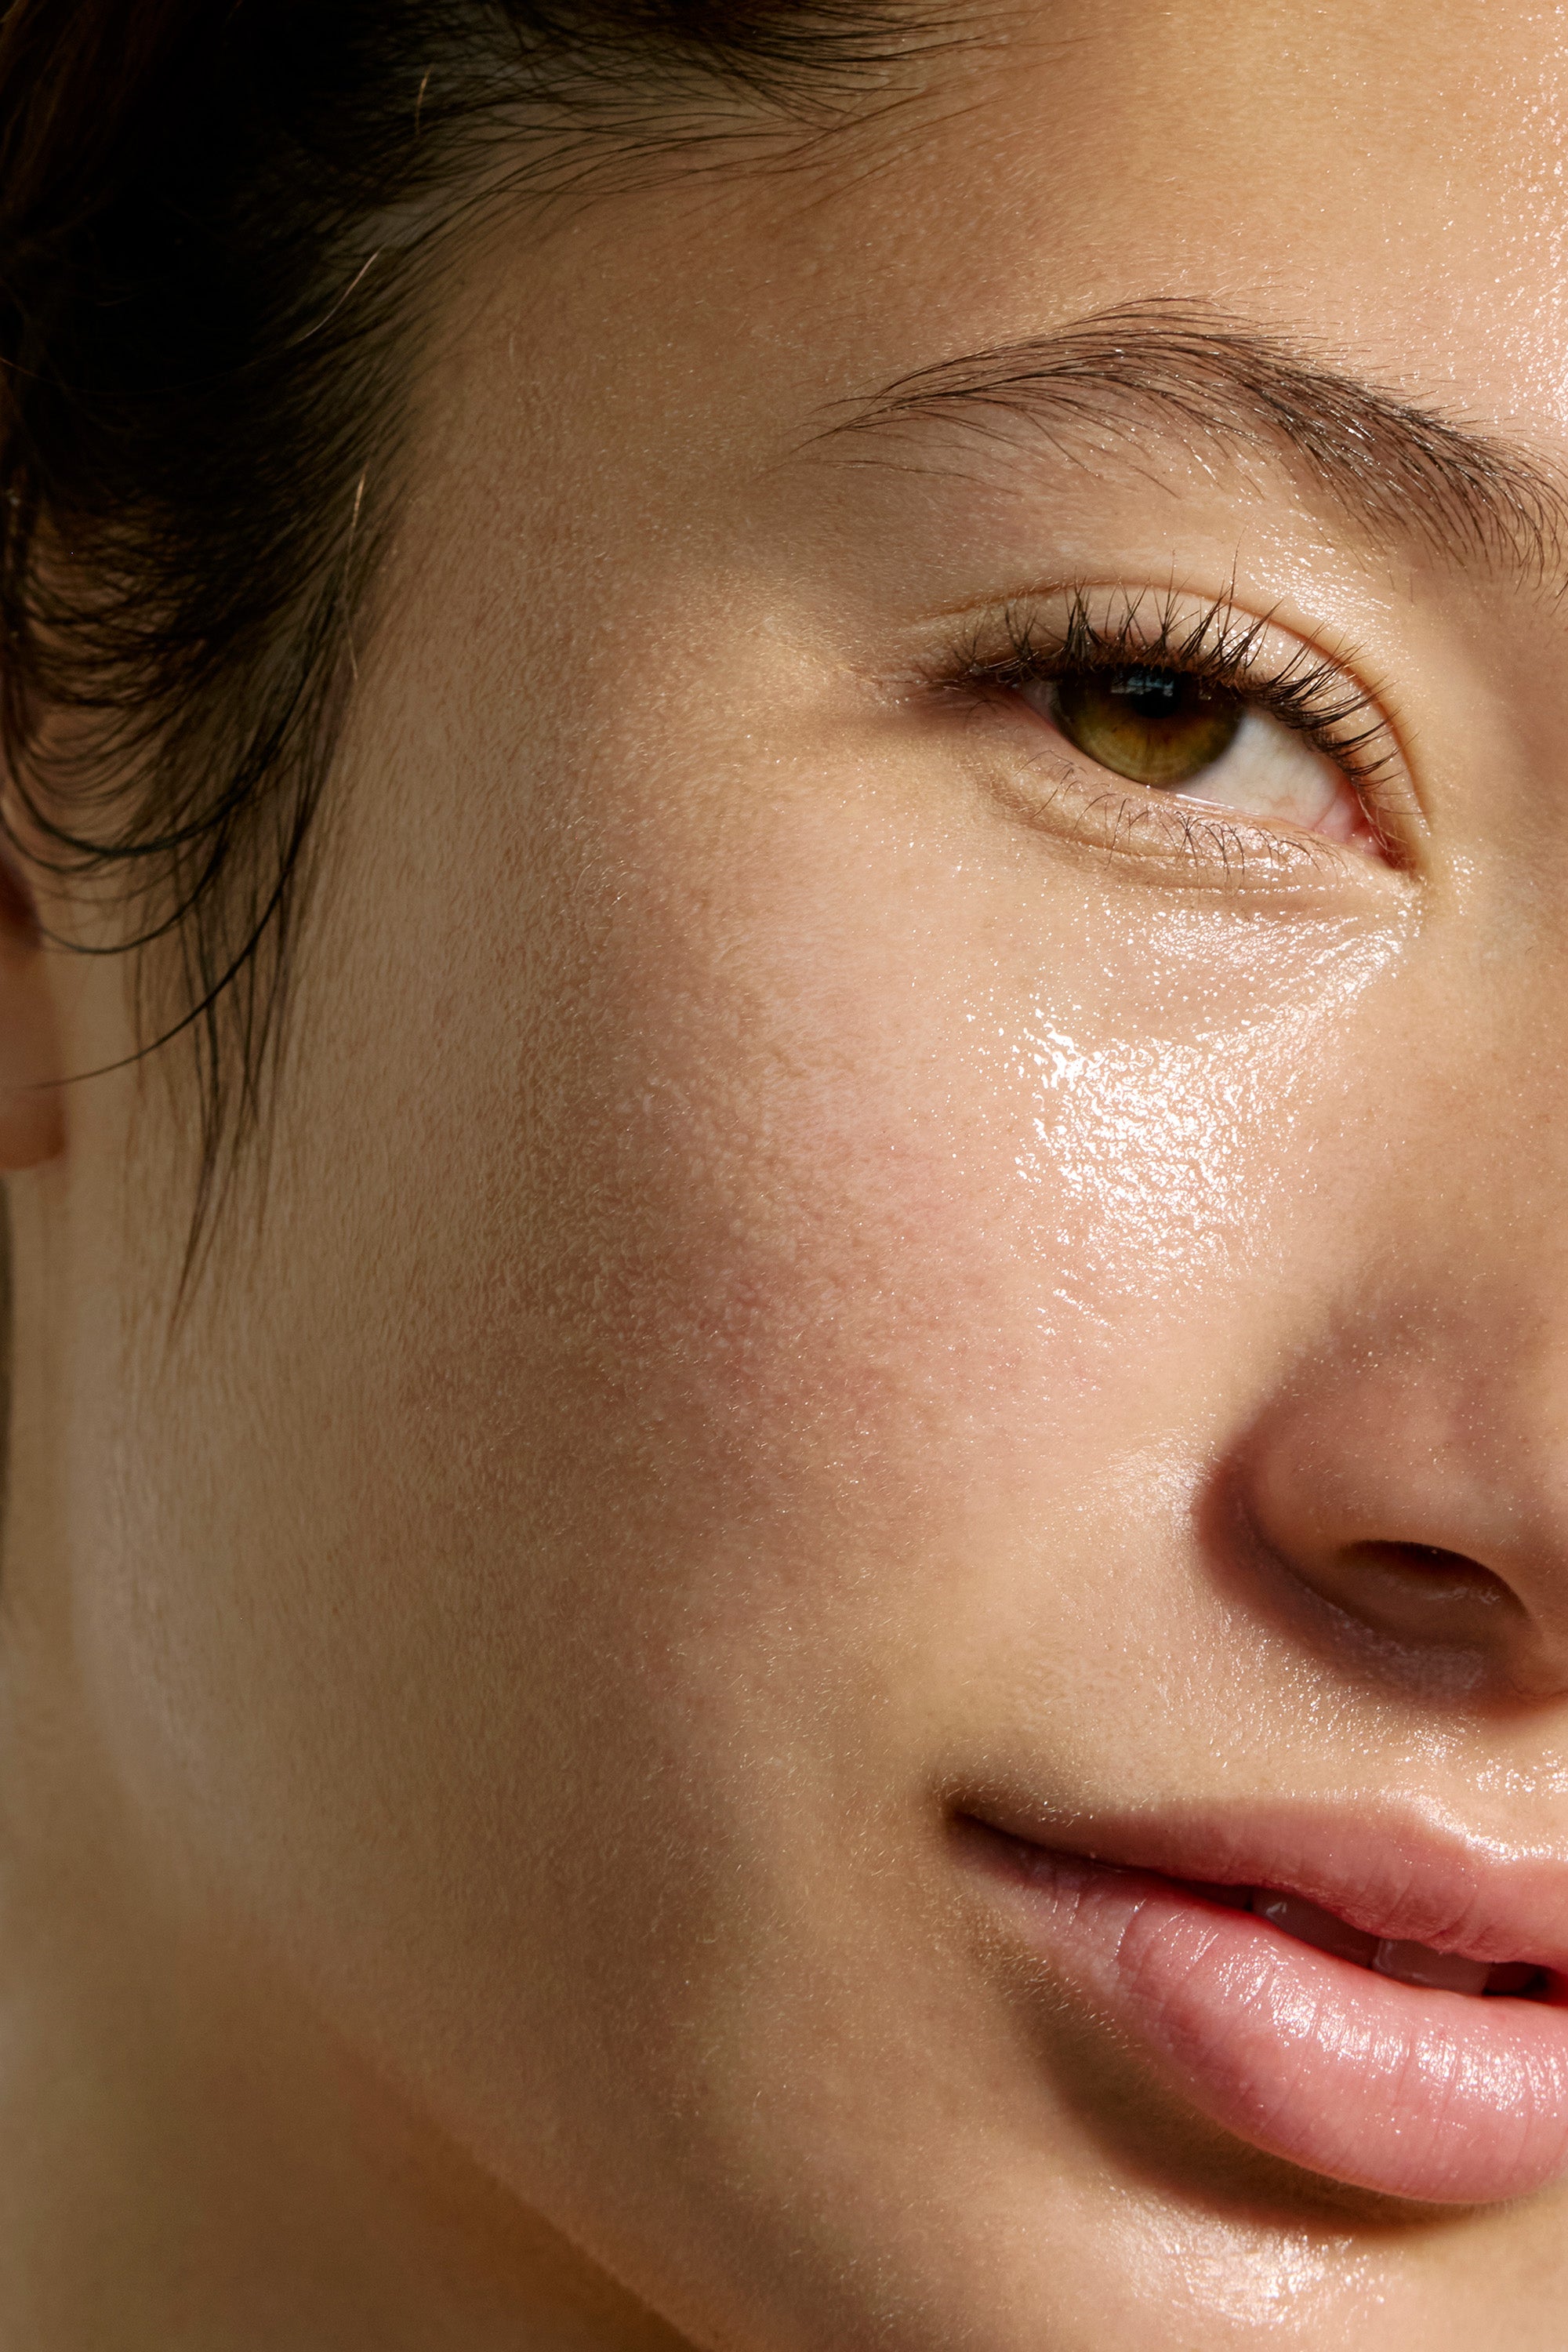 Close-up of the right side of a person's face, focusing on their clear, dewy skin. The image highlights smooth skin texture with a natural glow, thanks to Freaks of Nature Skincare's Daily System. The person's eye, partial eyebrows, and lips are visible, with wisps of dark hair framing the face.